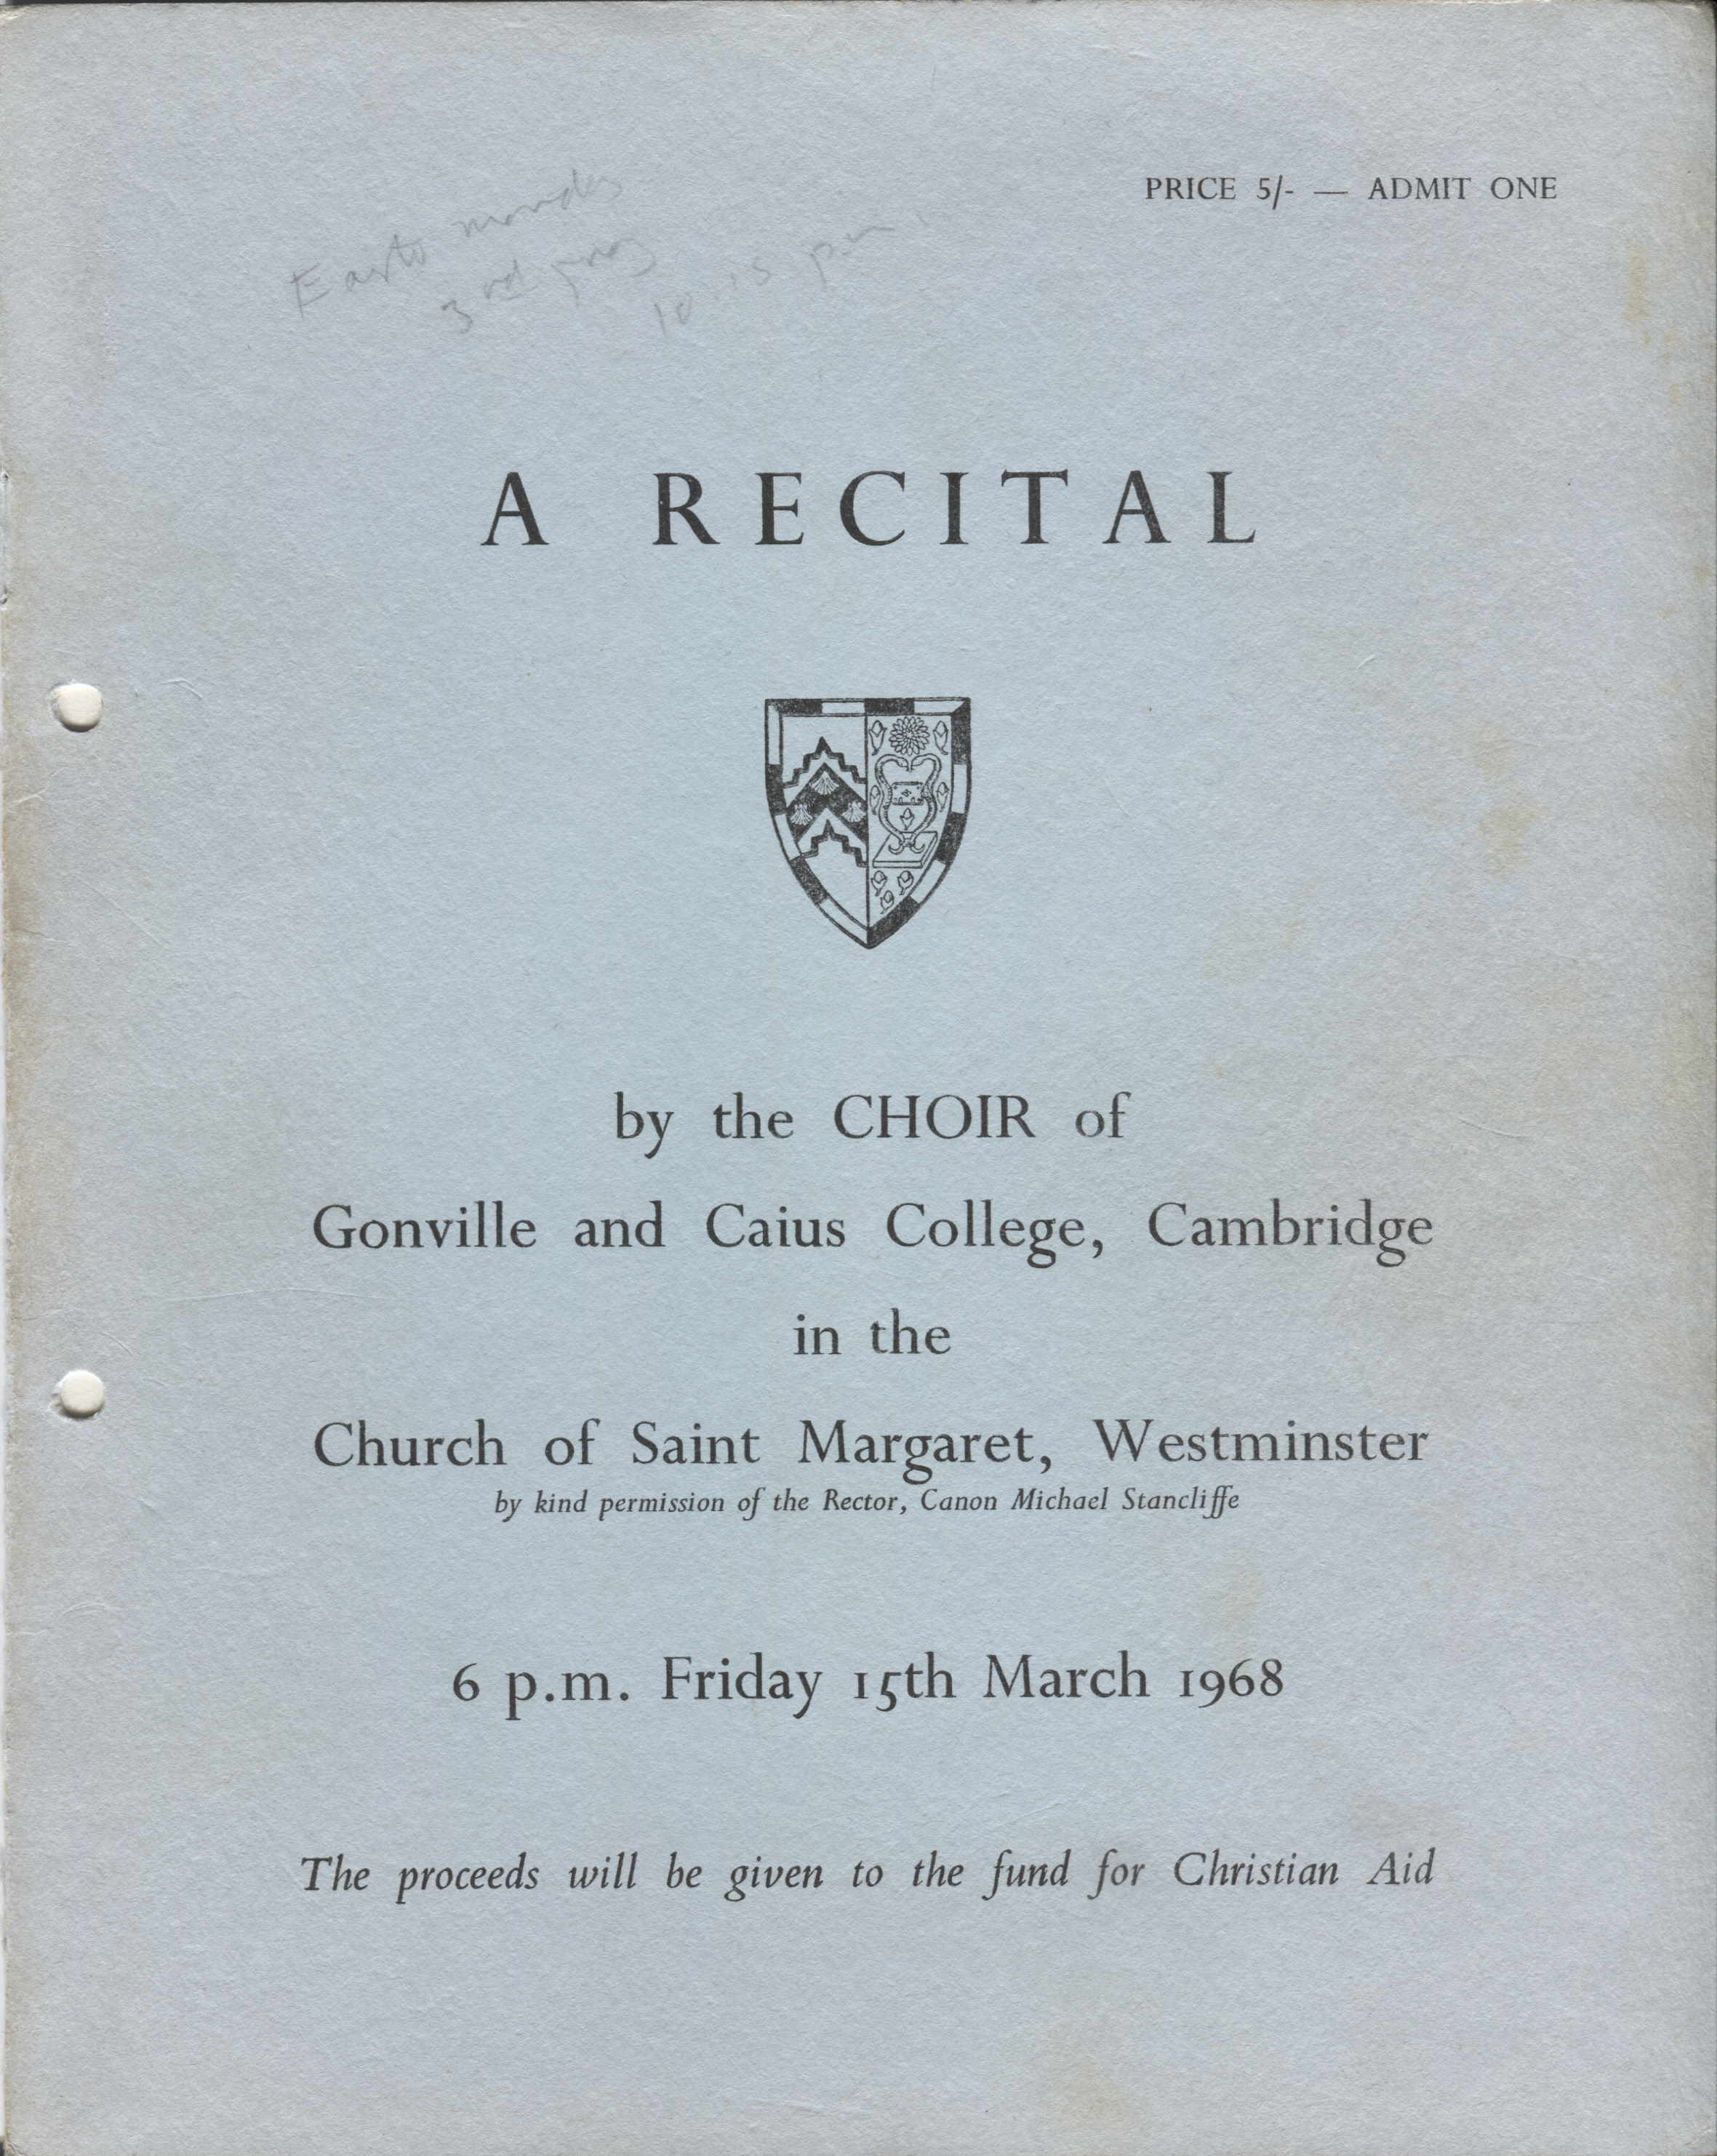 programme booklet for A RECITAL by the CHOIR of Gonville and Caius College, Cambridge in the Church of Saint Margaret, Westminster, 6p.m. Friday 15th March 1968